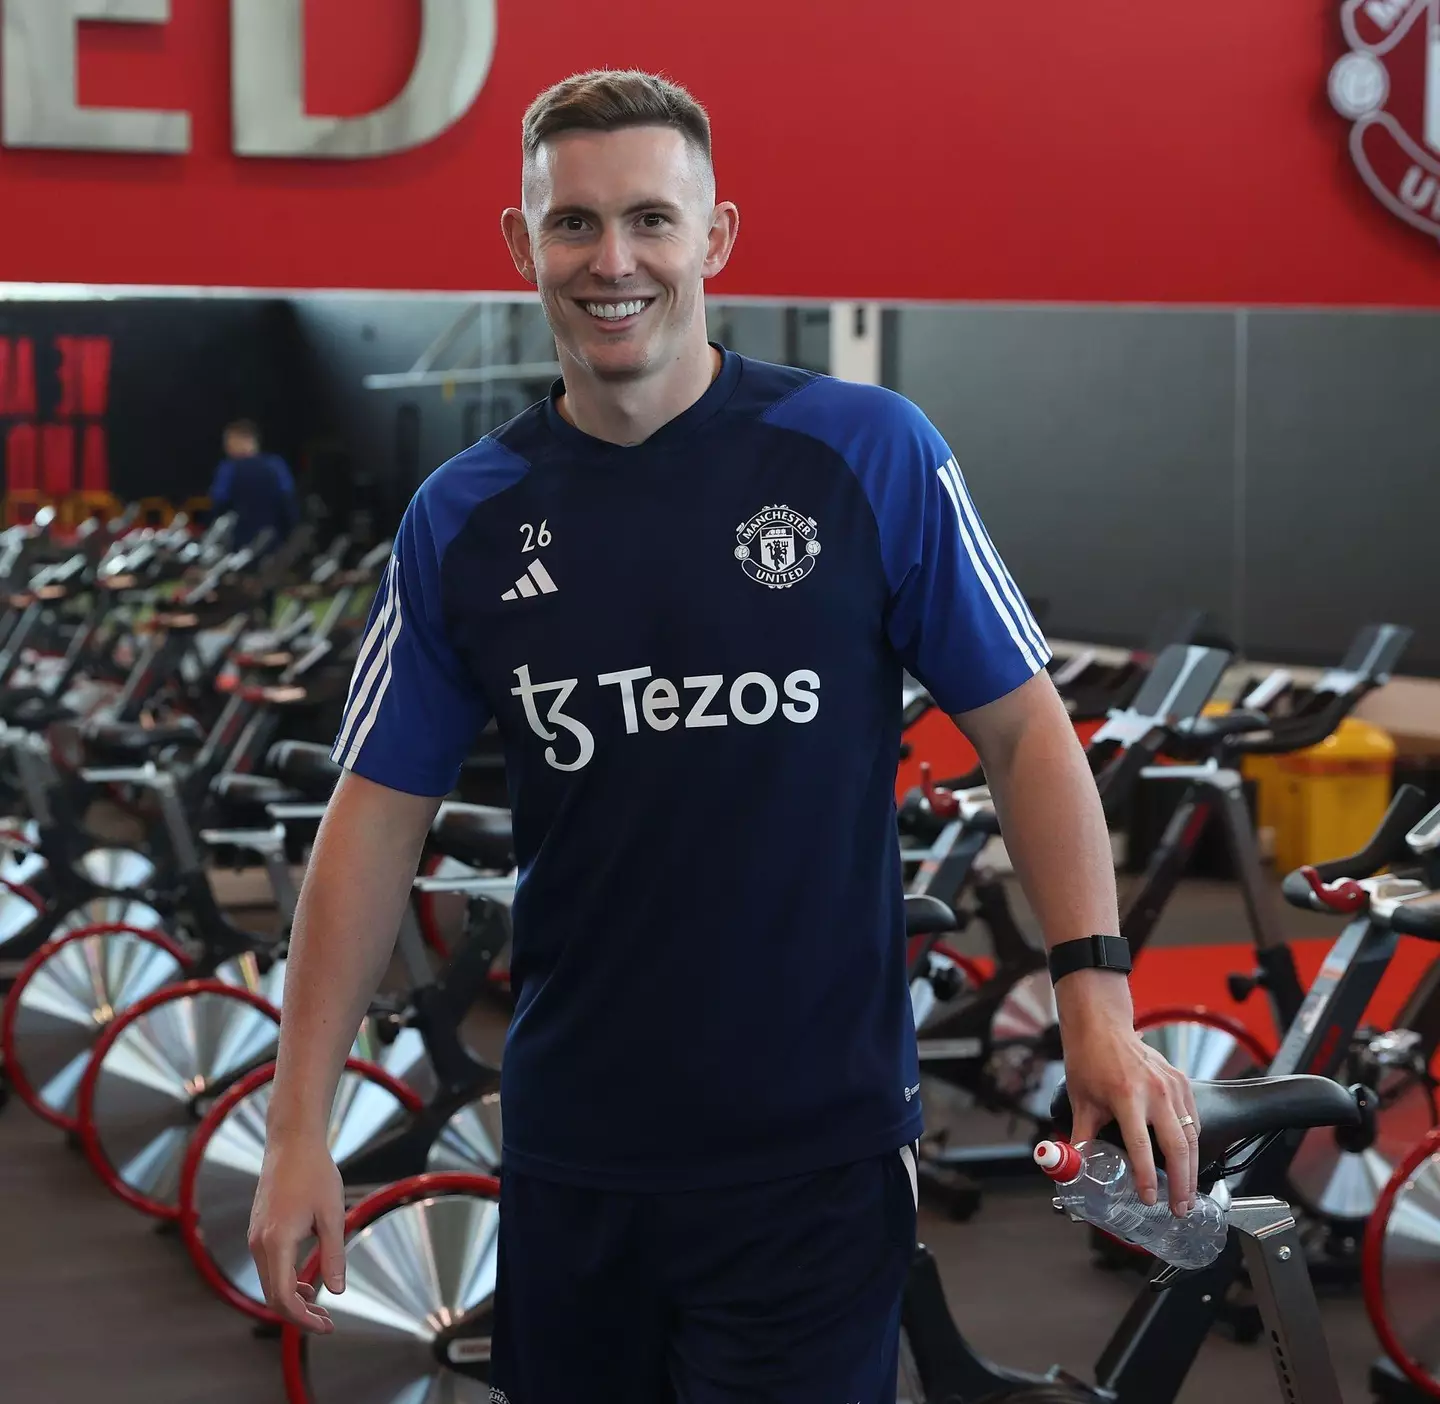 Henderson at United's training complex. Image: Manchester United